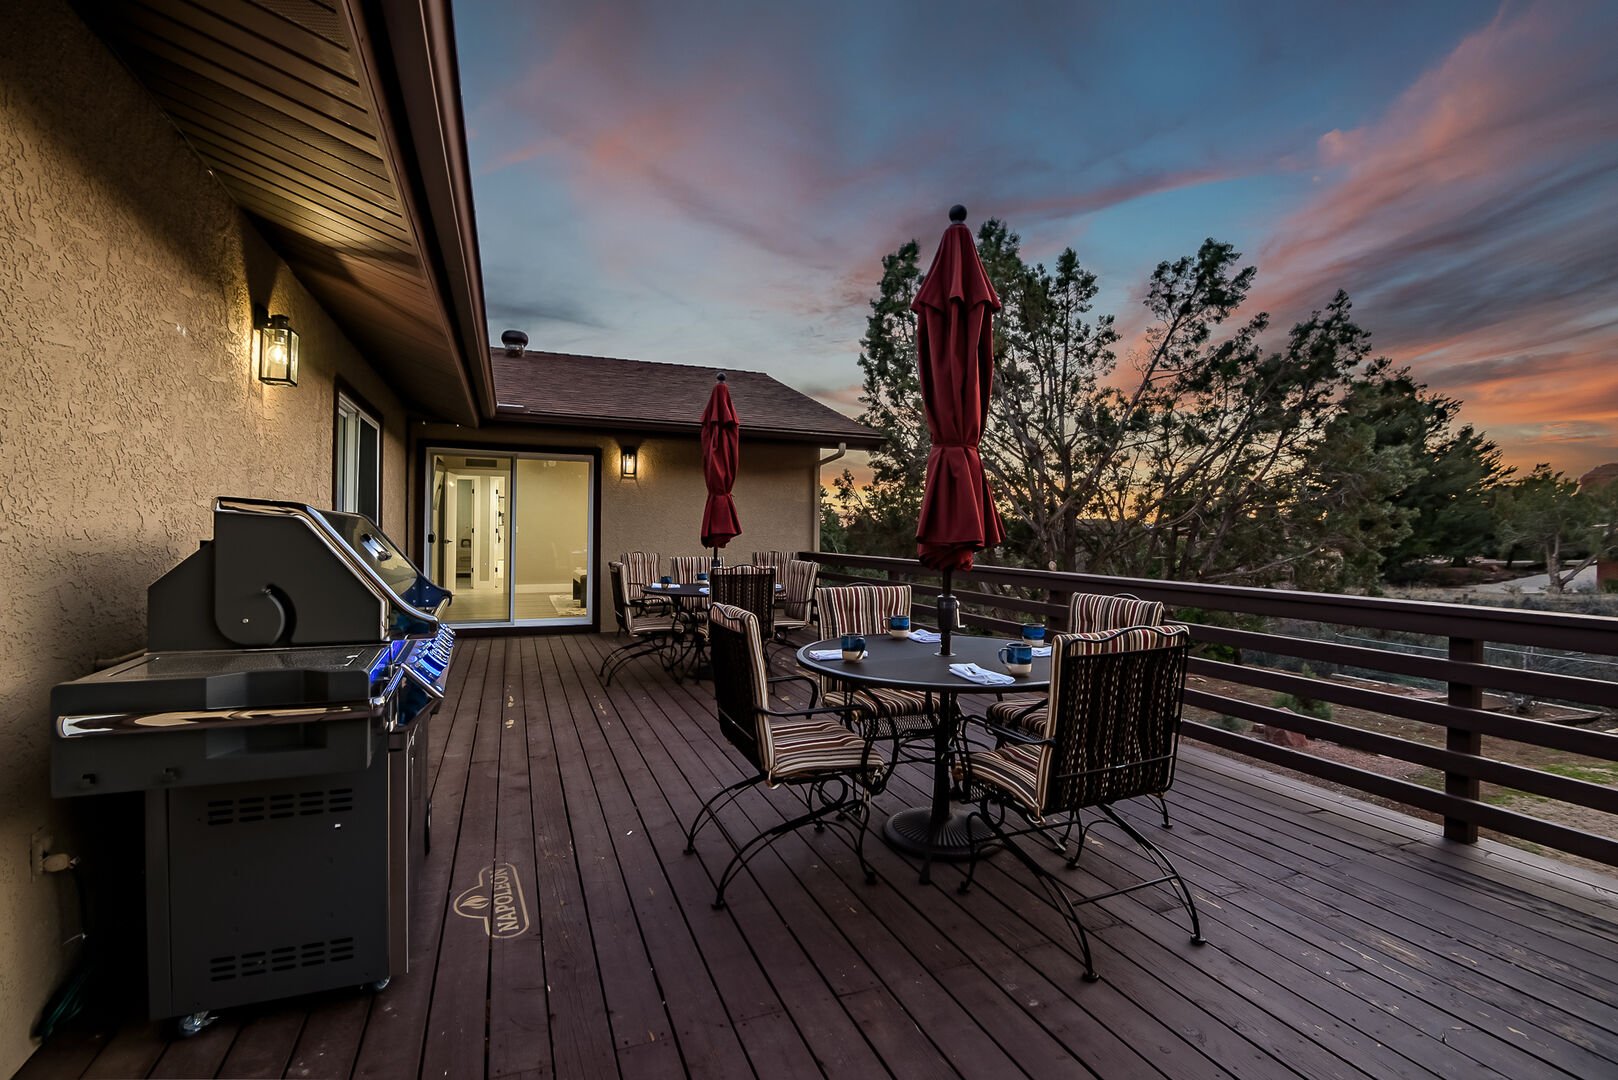 Enjoy views with outdoor seating and BBQ